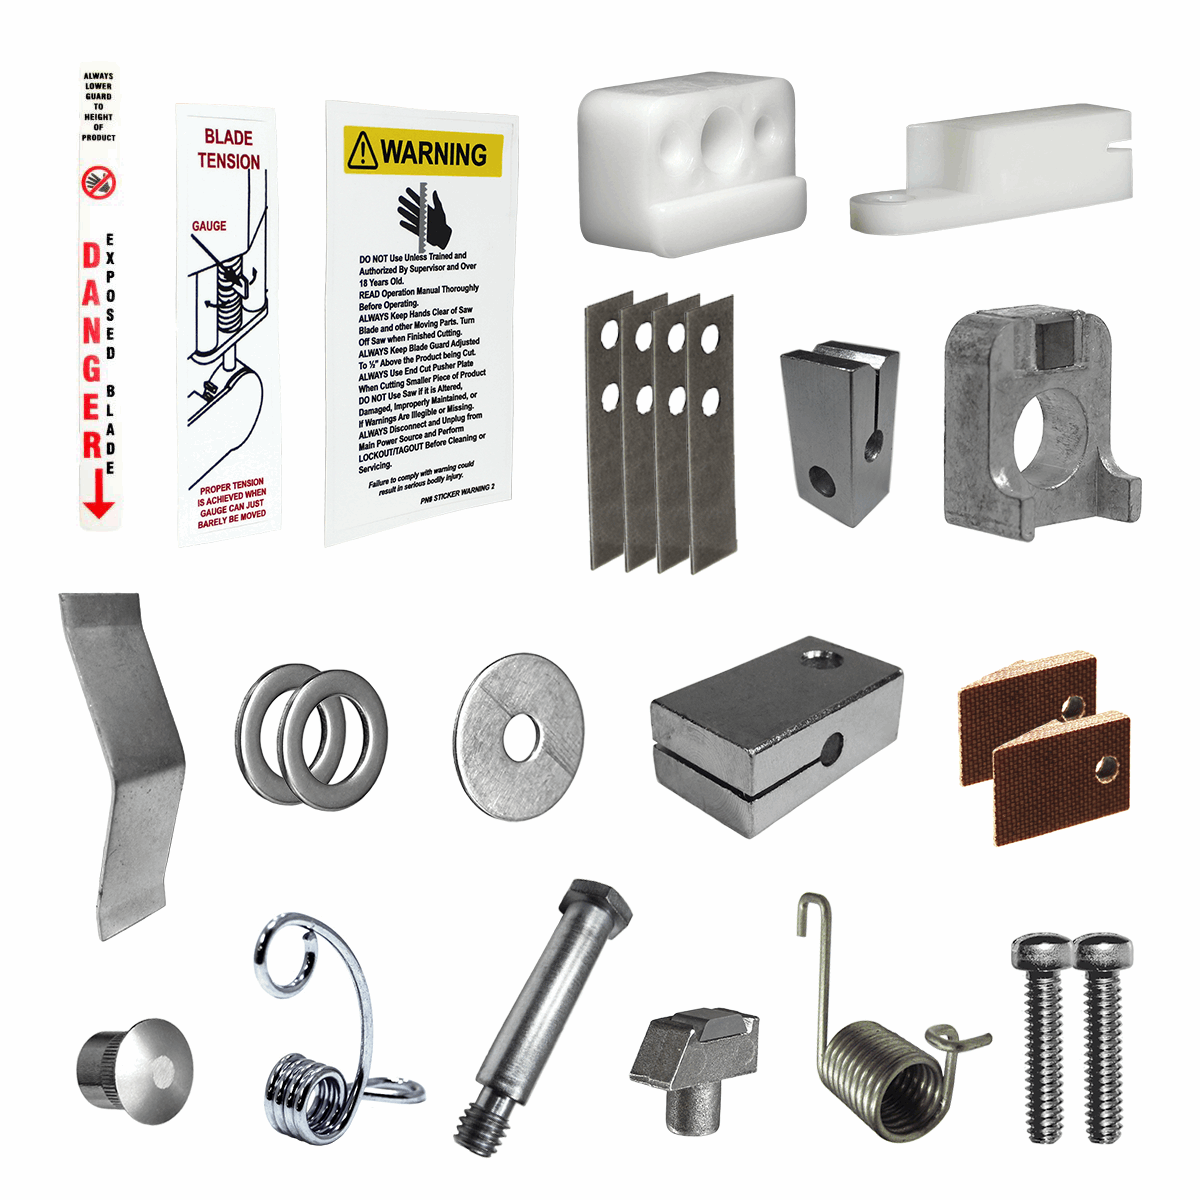 Repair kit for Biro meat saws.  The kits are designed to give you access to the most common wear items and replacement stickers.  Replaces:   16700  Fits model(s):  11  3334  3334-4003